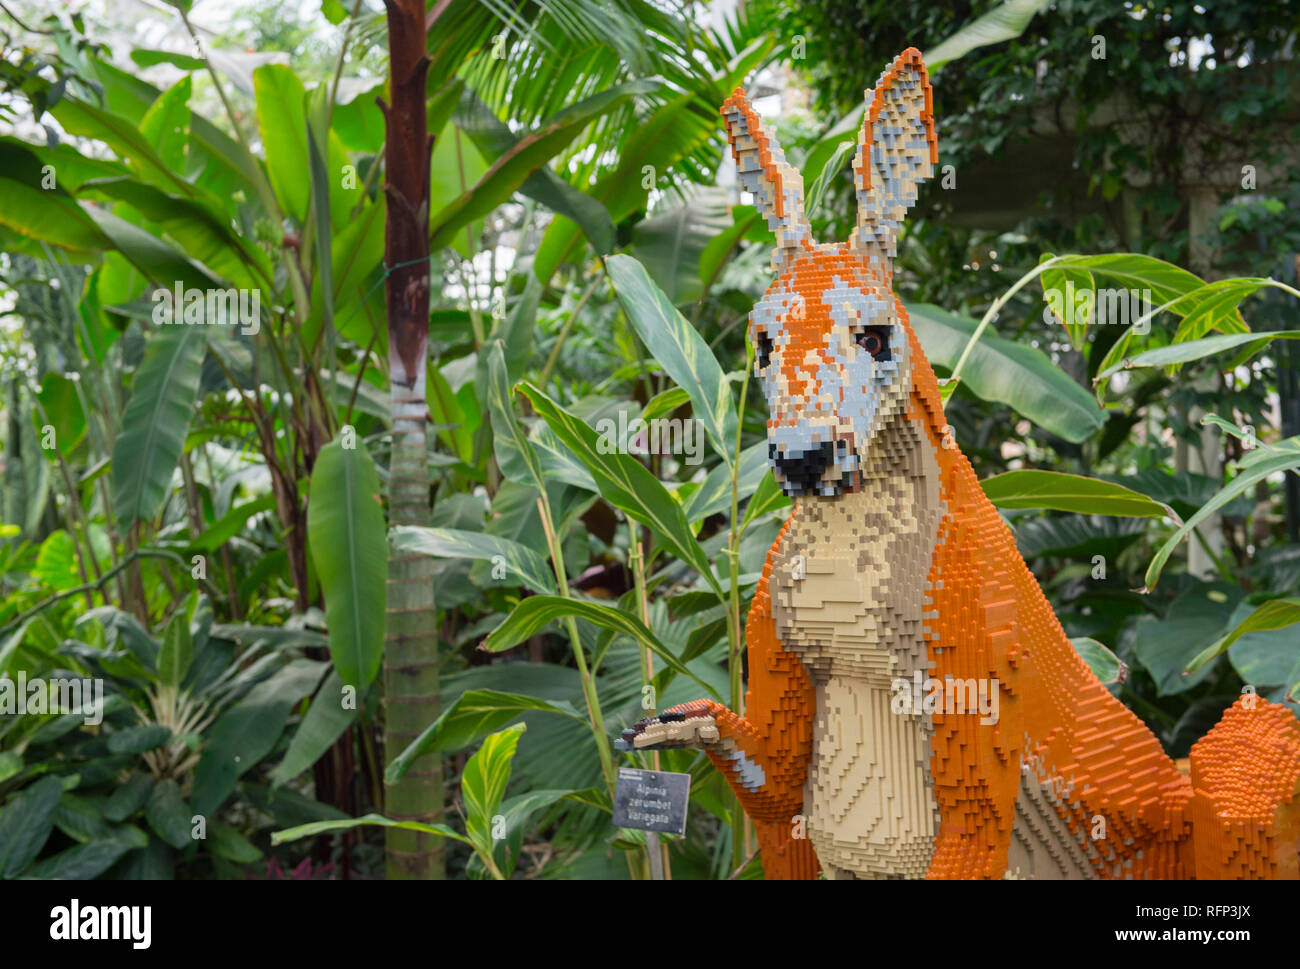 RHS Garden Wisley, Surrey, UK. 25 January, 2019. Final preparations of more than 40 life-sized animals and plants including this Australian Kangaroo Stock Photo